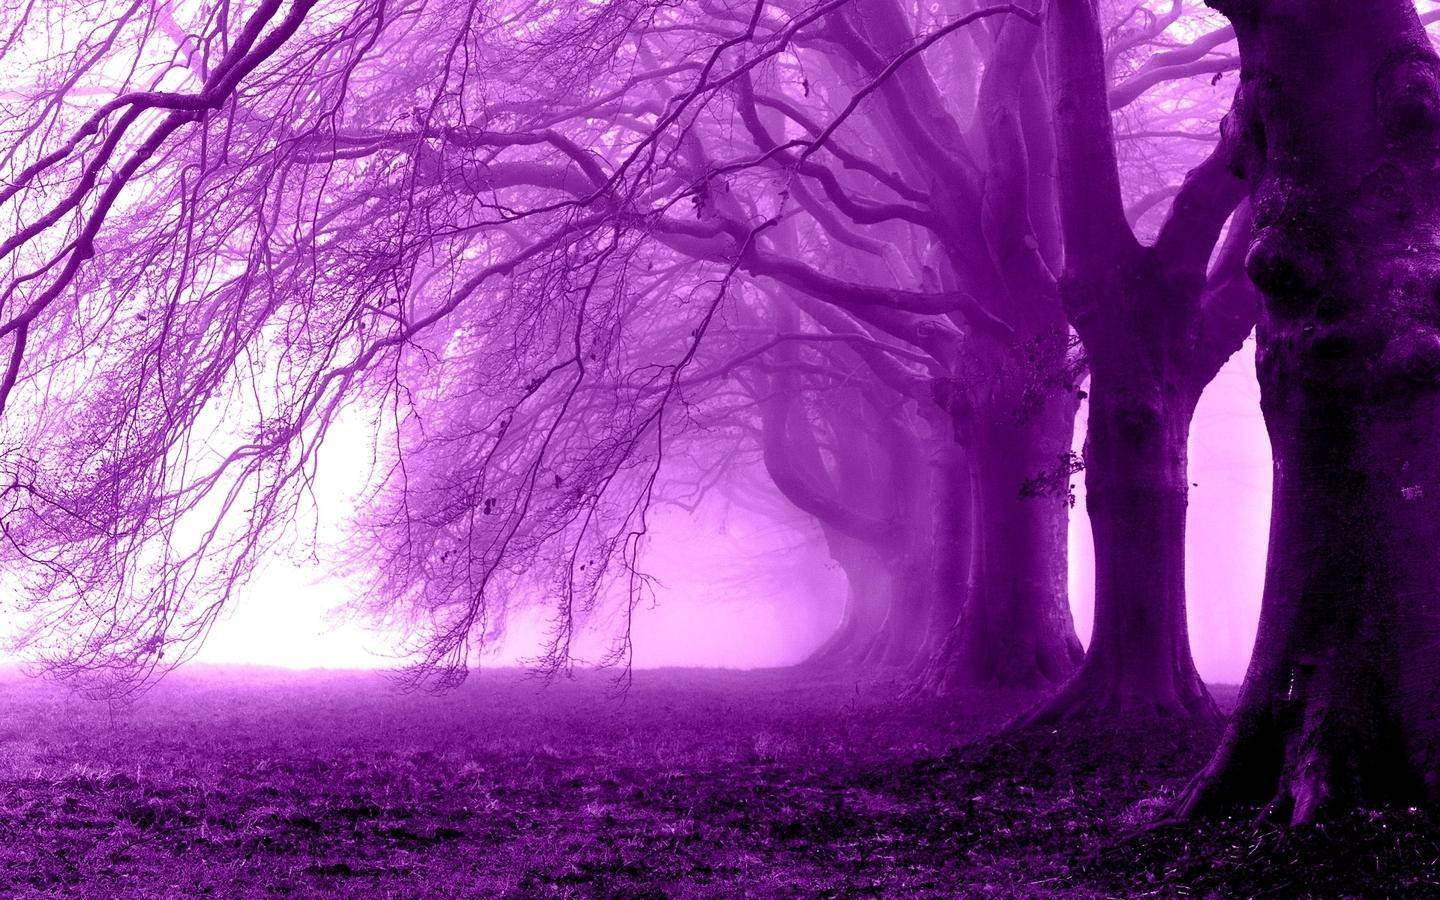 Dead Purple Trees In The Forest